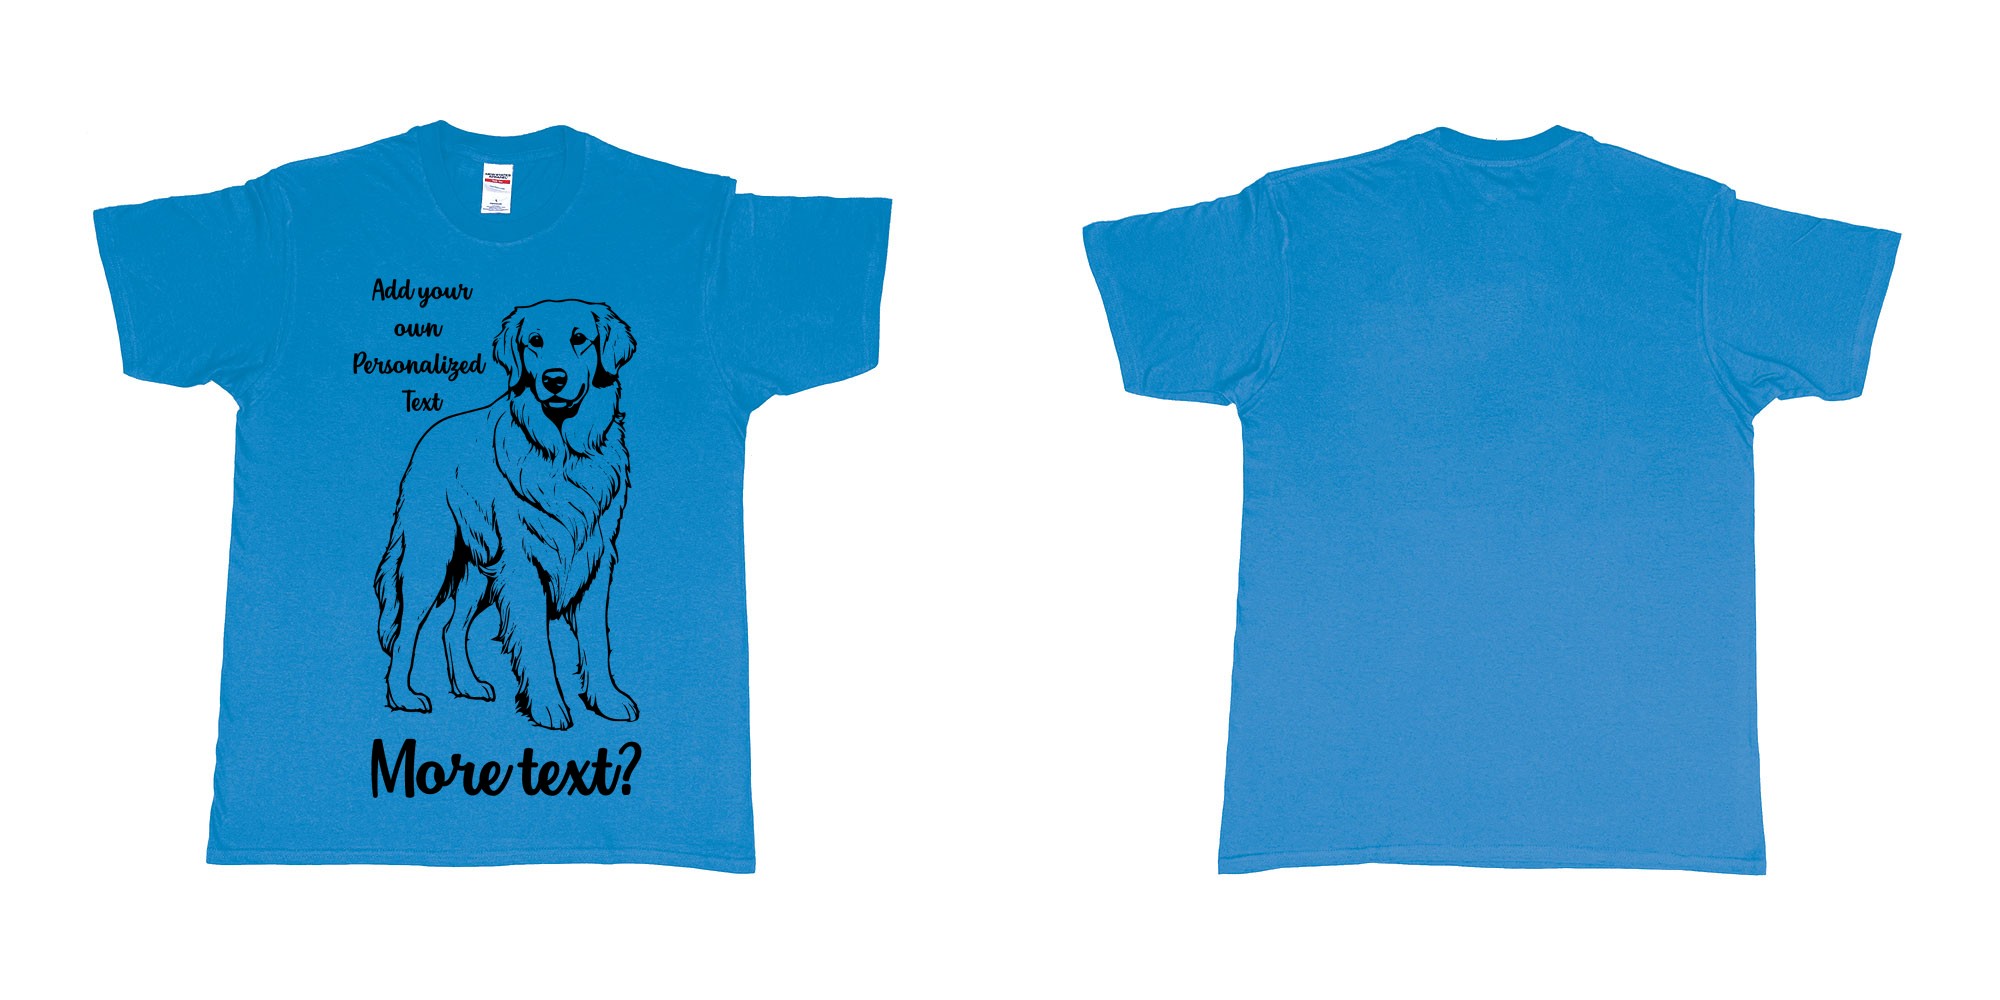 Custom tshirt design golden retriever dog breed personalized text in fabric color sapphire choice your own text made in Bali by The Pirate Way